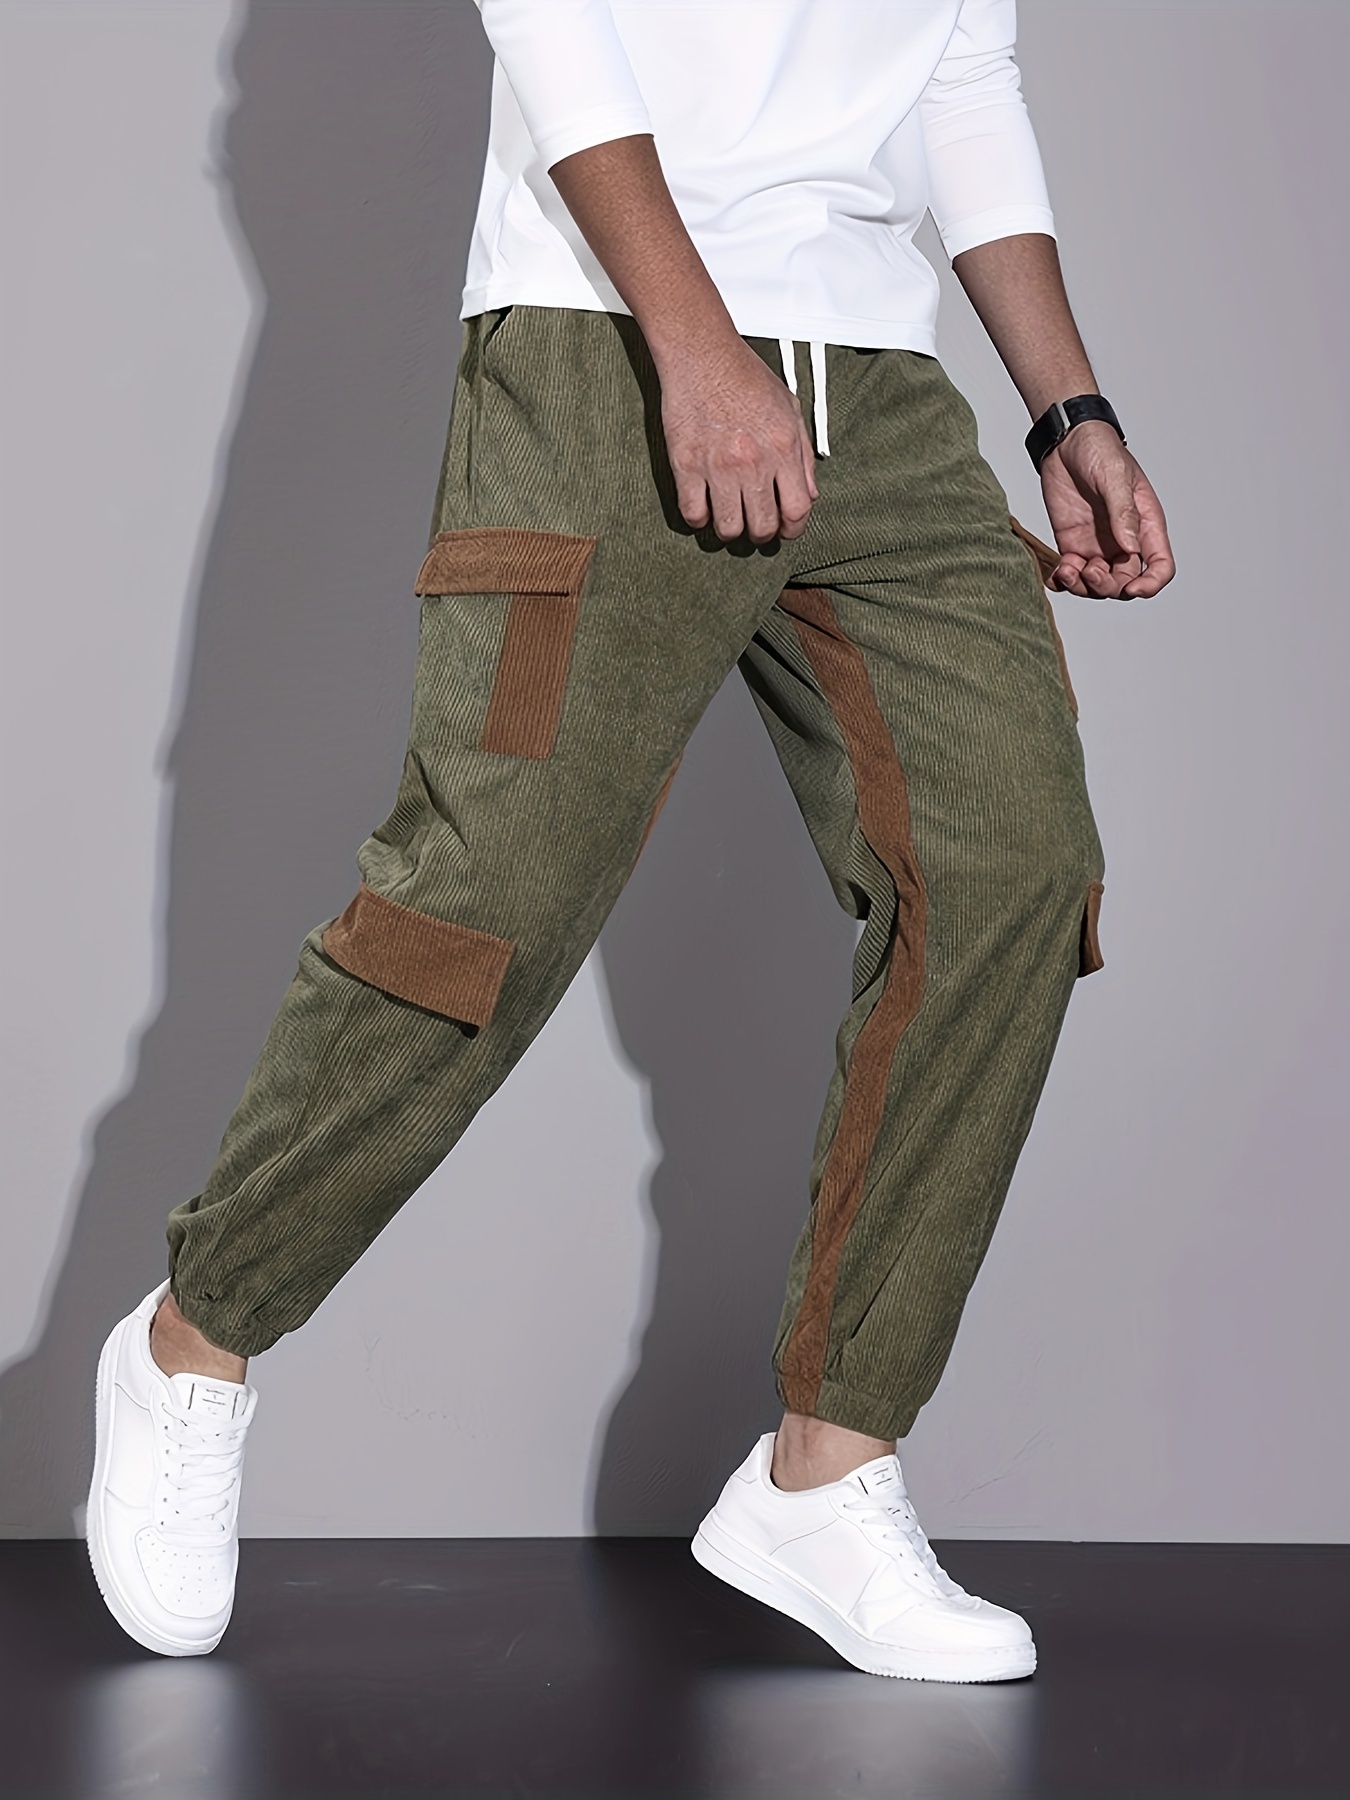 Basic Corduroy Cargo Pants  Colored pants outfits, Aesthetic